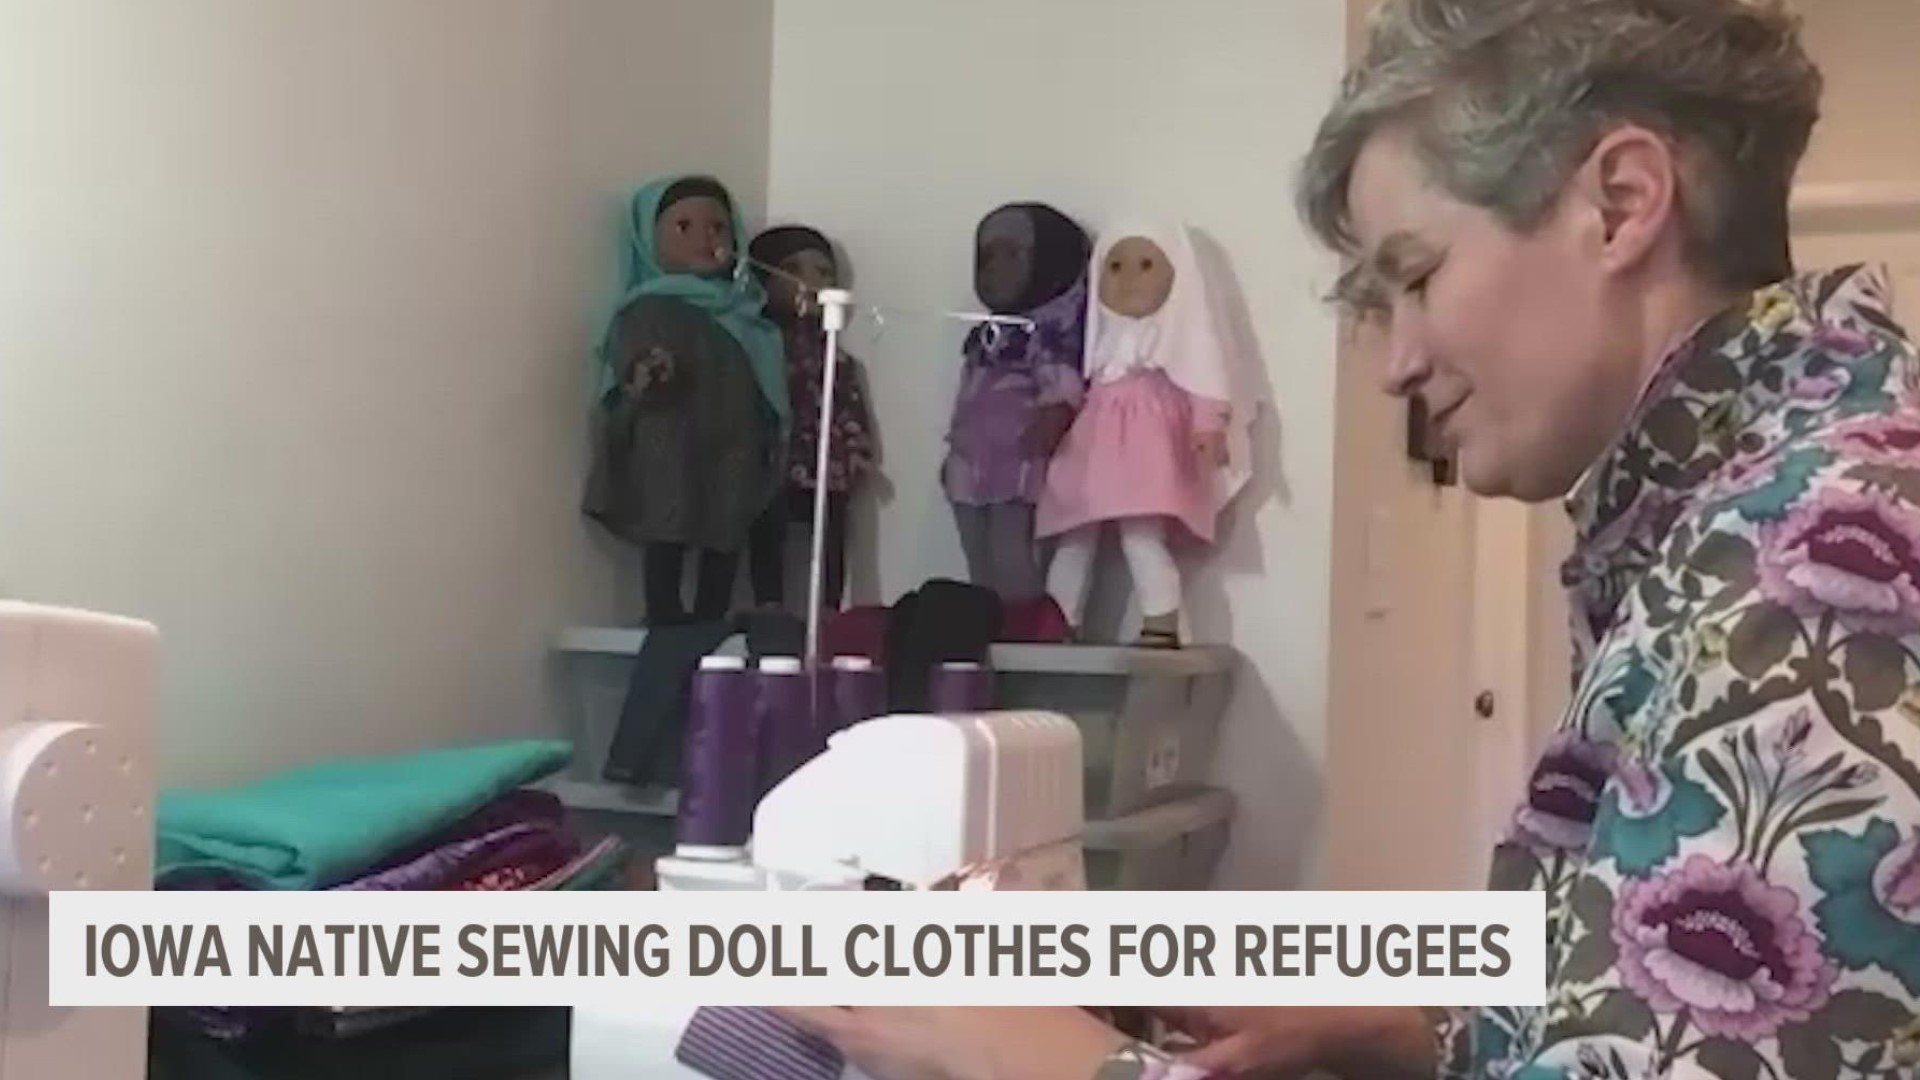 An Iowa native is sewing culturally specific doll clothing to give to children who are refugees from  Afghanistan. It's her way of welcoming them to the area.